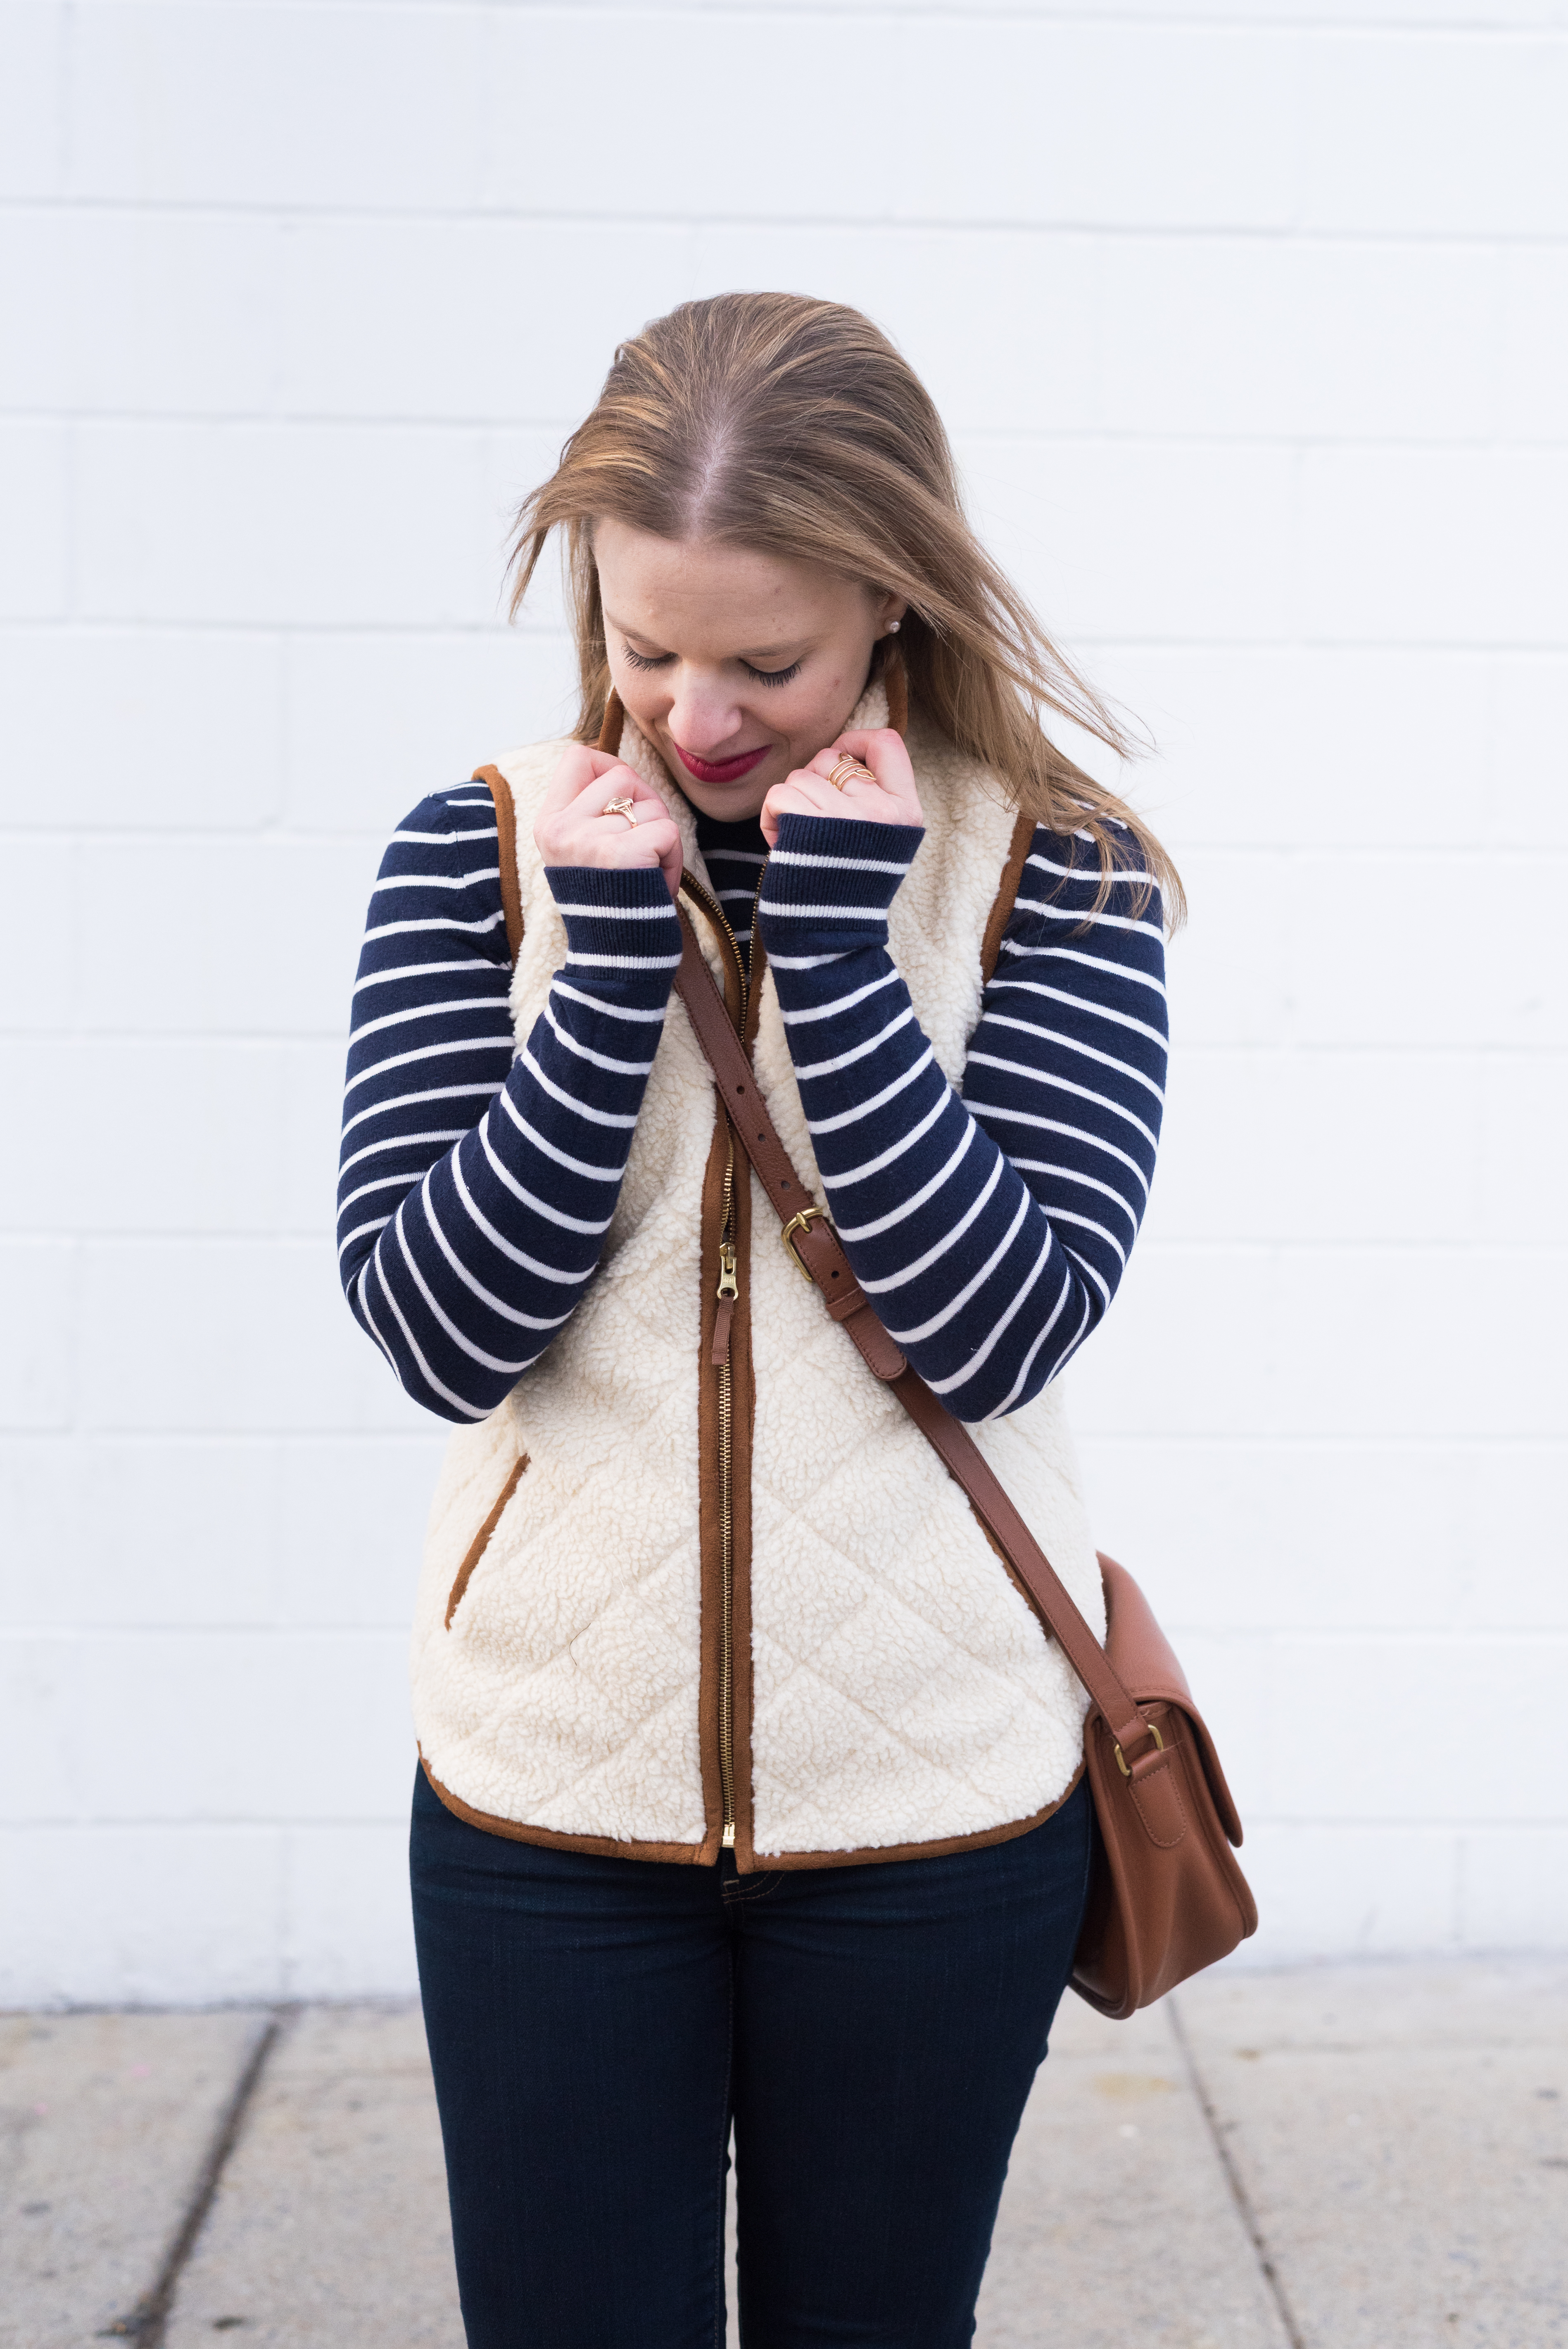 What I Learned From You | Something Good, @danaerinw, sweater, brown bag, white vest, brown and white vests, blue and white stripes blue and white sweater